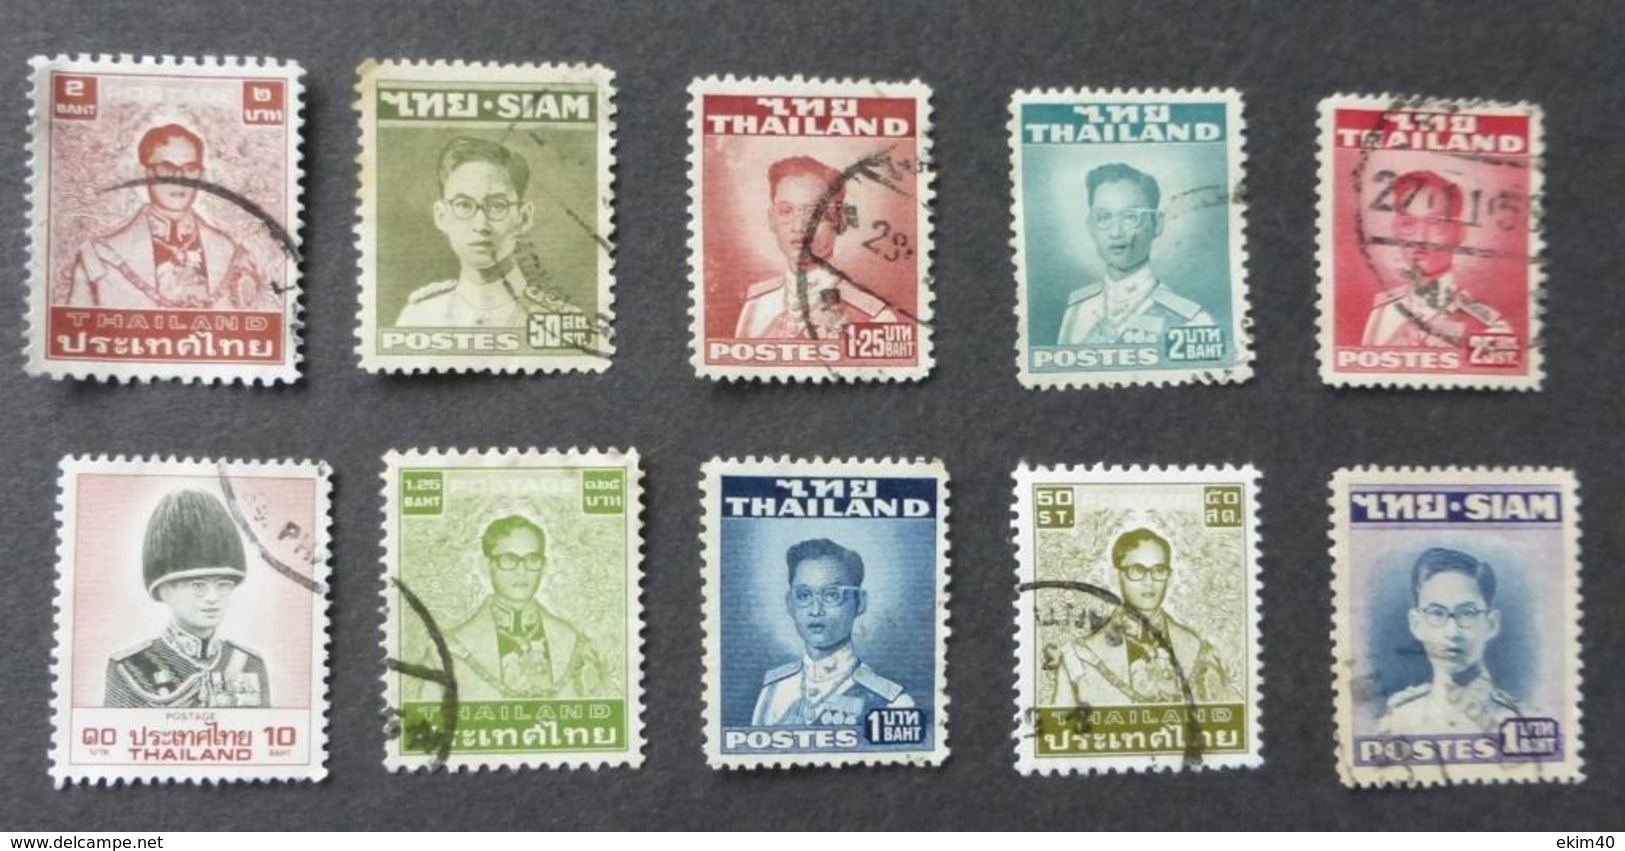 Selection Of Early Thailand/Siam Used/Cancelled Hinged Stamps- Various Issues No DK-609 - Thailand